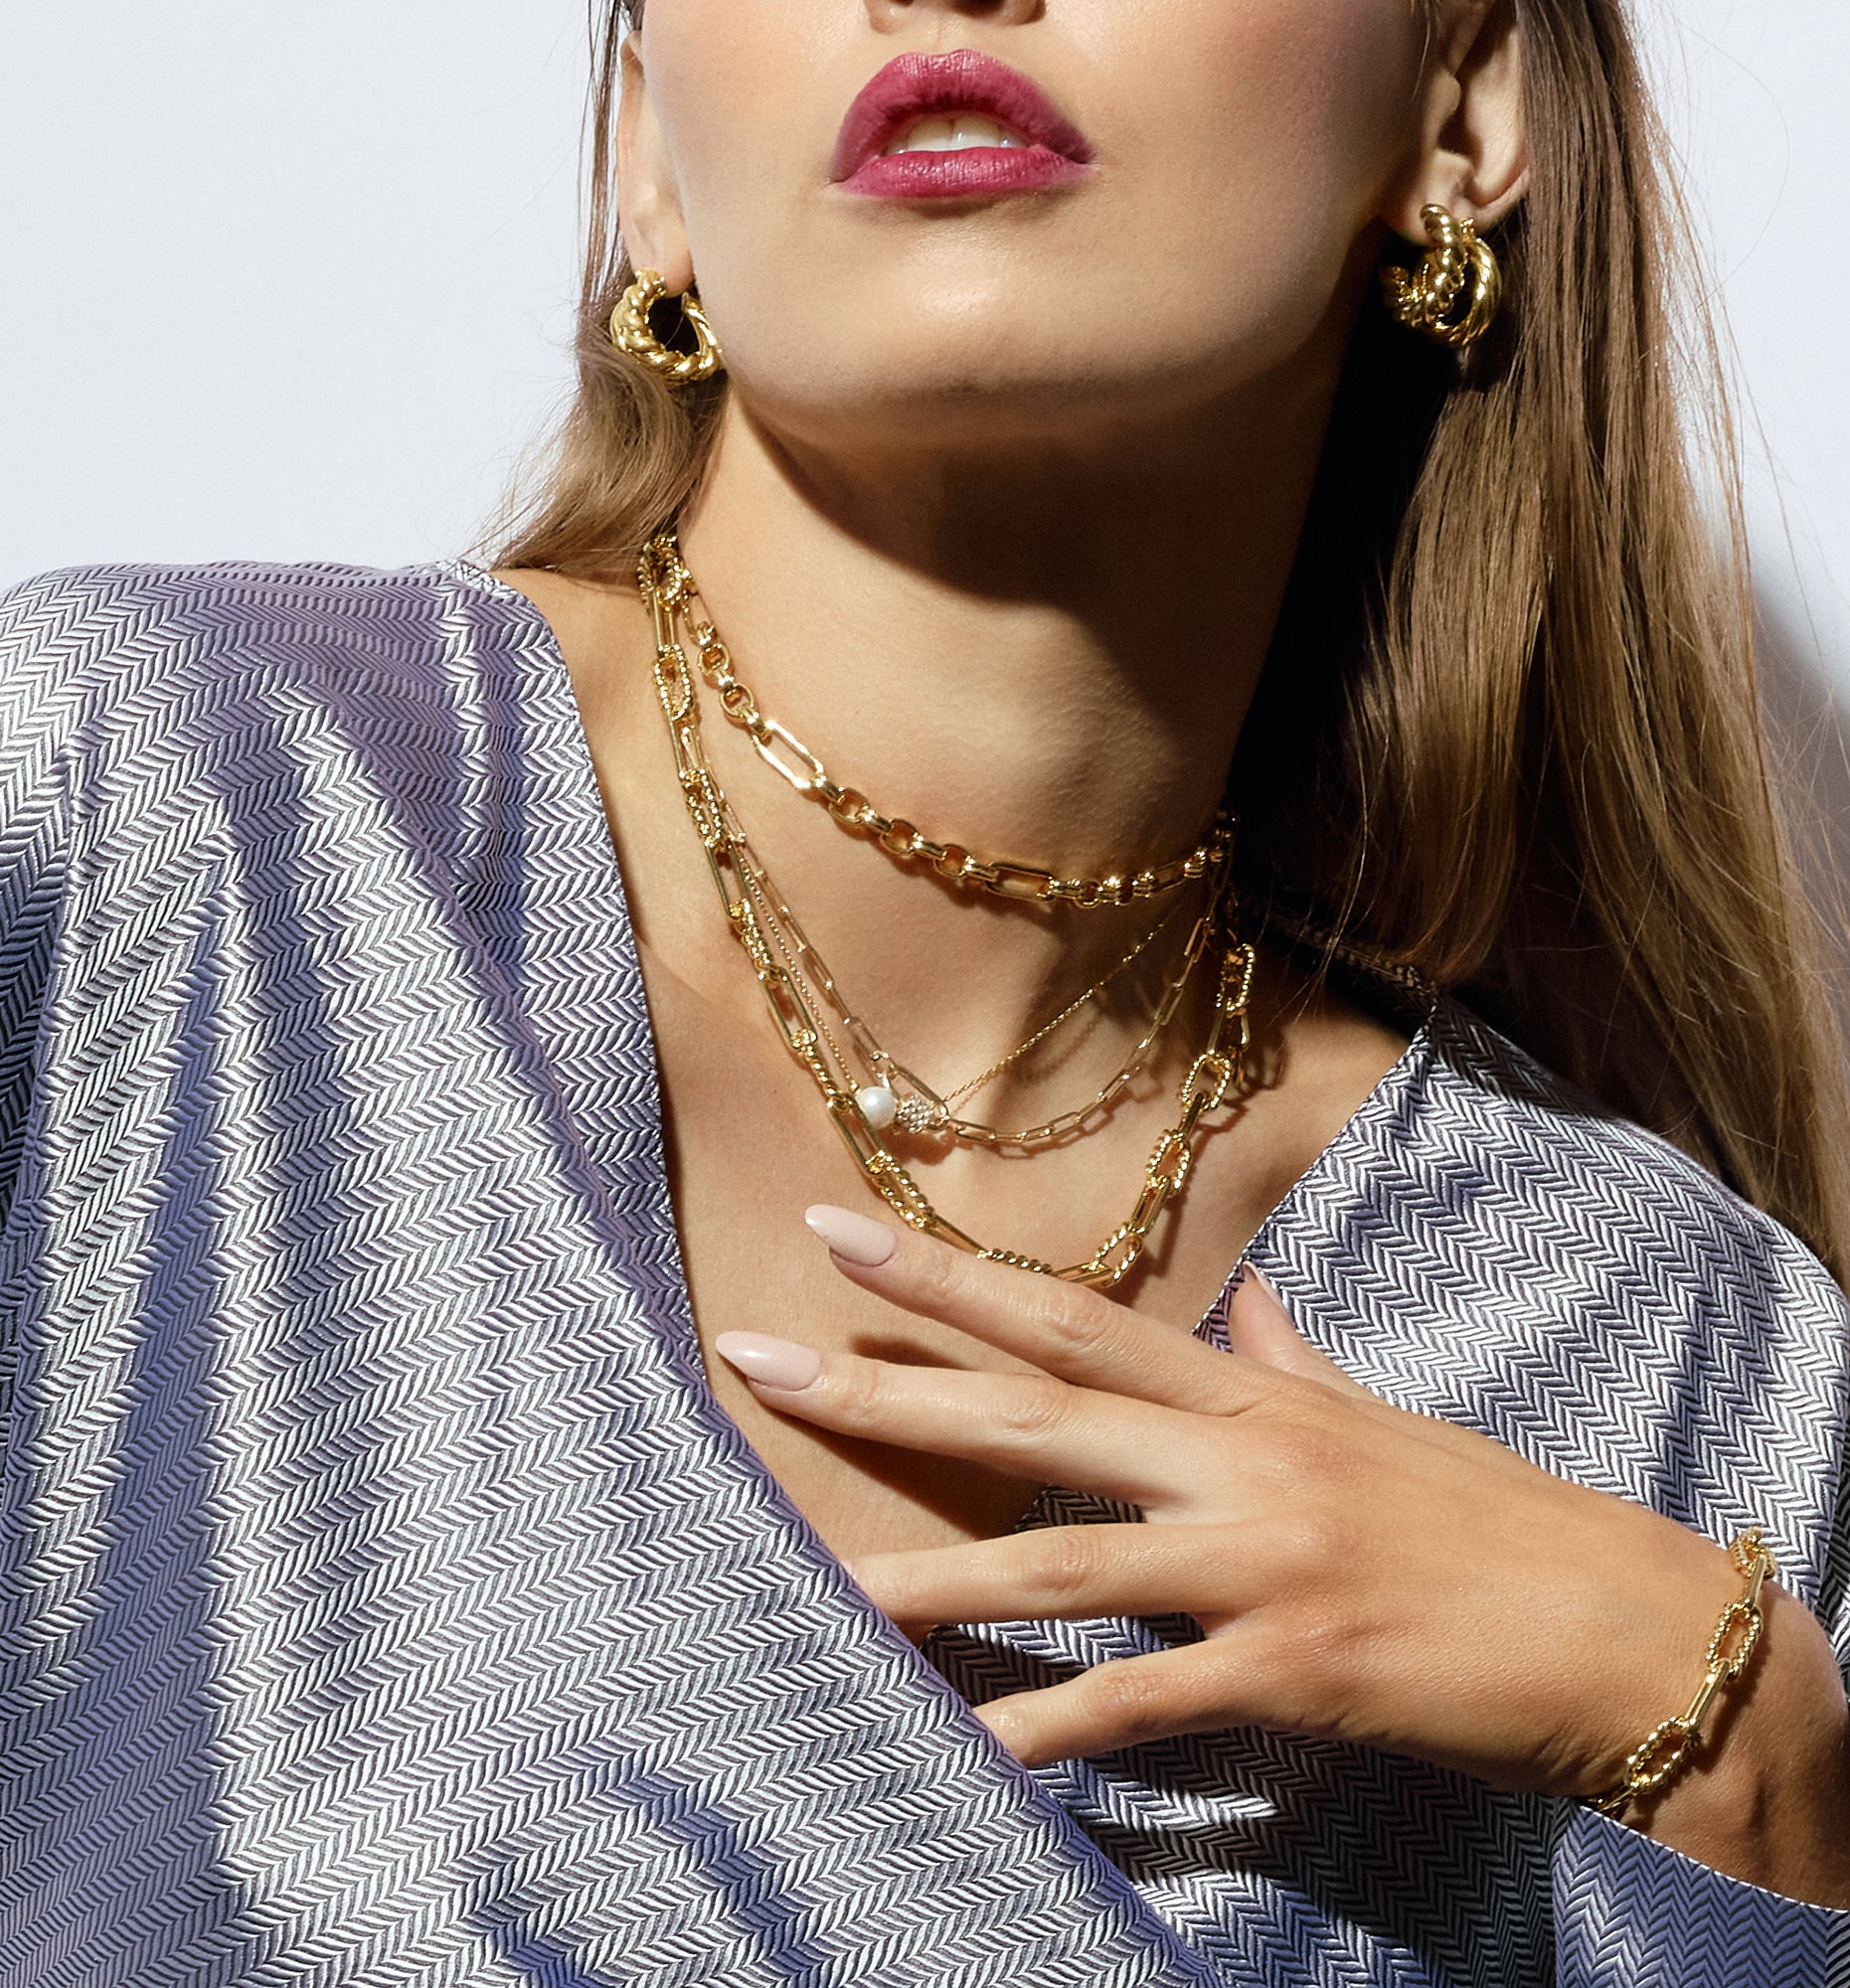 We wanted to create a brass collection because it is one of the most recycled metals in the world. The entire collection is electroplated with a thick layer of pure gold to give it that luxe feel.